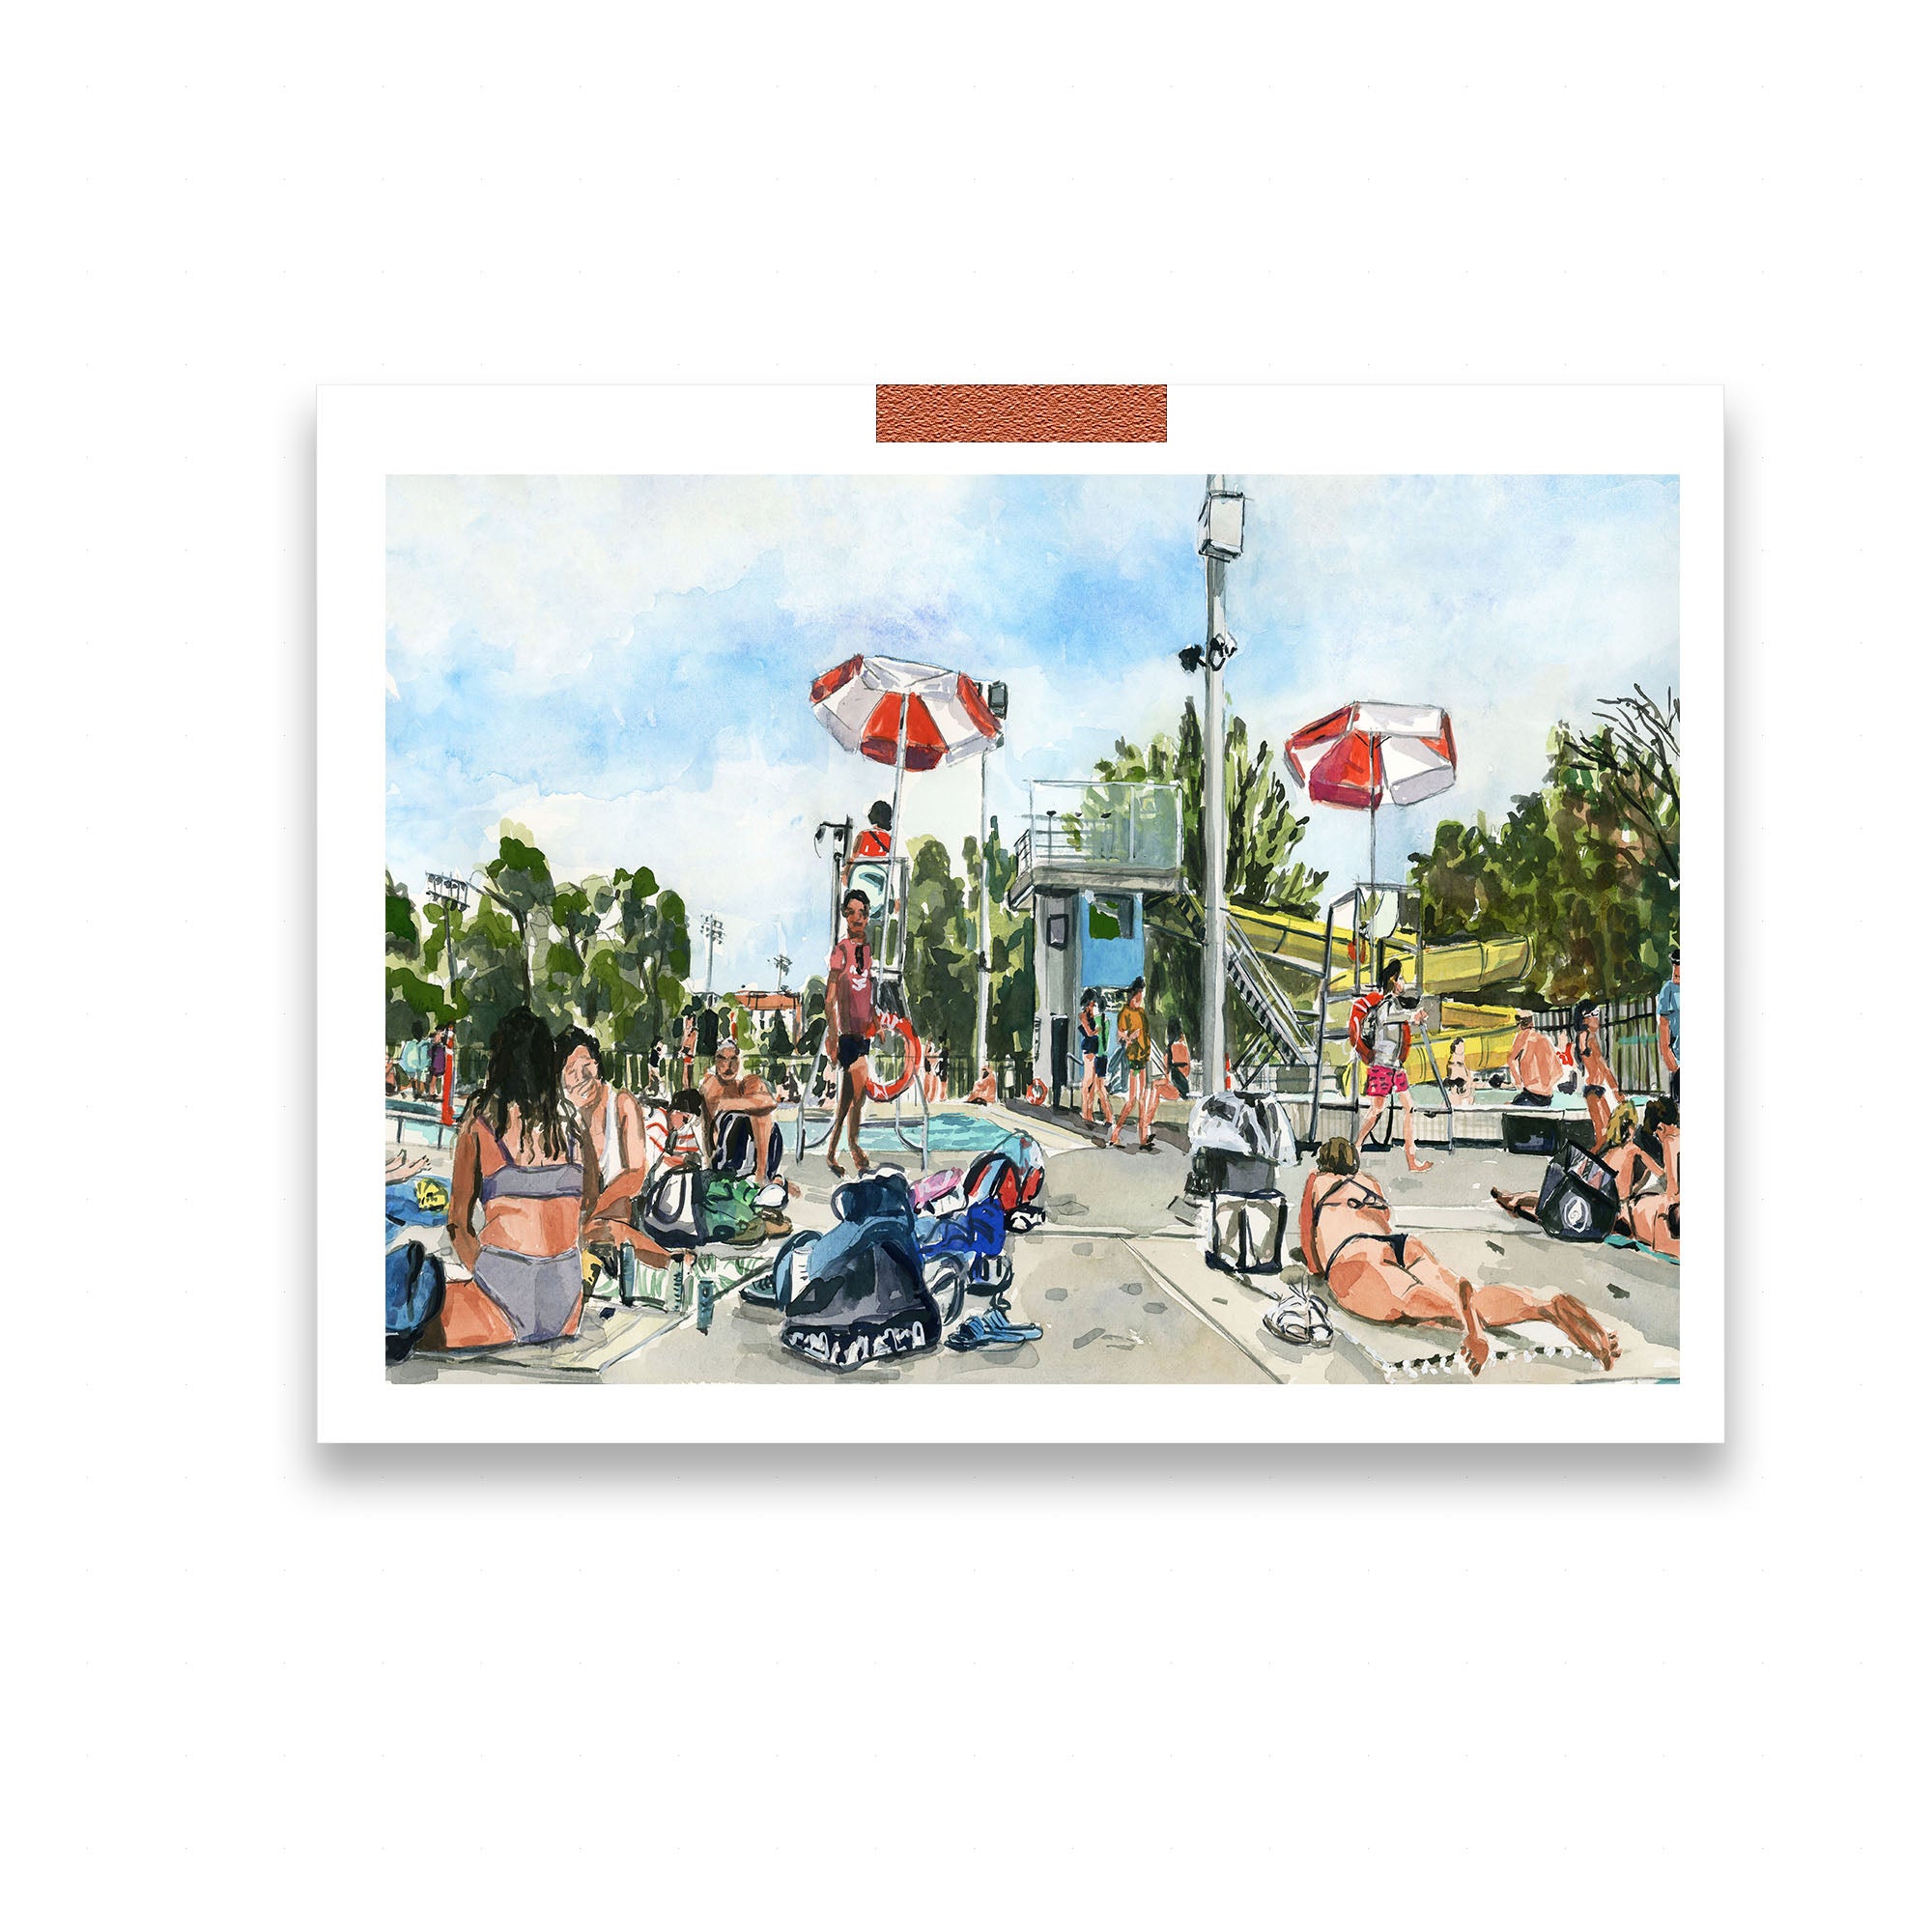 Summer pool art print of painting by Medjool Studio. Print of an original gouache painting of a summer pool scene inspired by the artist's daily life. Shows a scene at a neighbourhood pool filled with people enjoying their summer weekend.